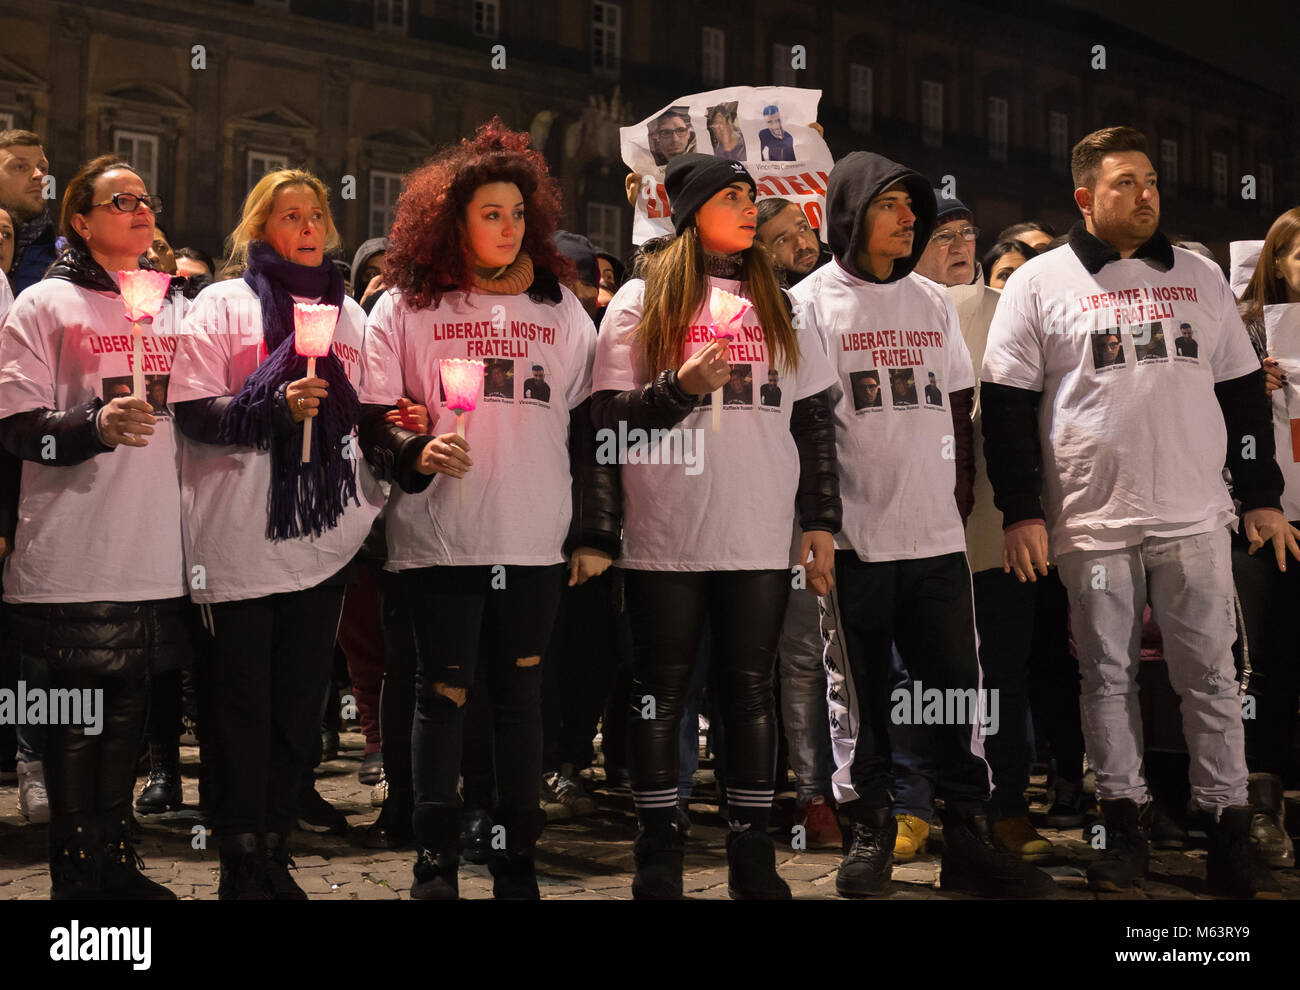 Naples, Campania, Italy. 28th Feb, 2018. Demonstrator seen holding candles during the rally.Rally organized by the family of the three Neapolitan men kidnapped in TecalitlÃ n in Mexico, they demand their immediate release. Credit: EVicinanza Desaparecidos 3 .jpg/SOPA Images/ZUMA Wire/Alamy Live News Stock Photo